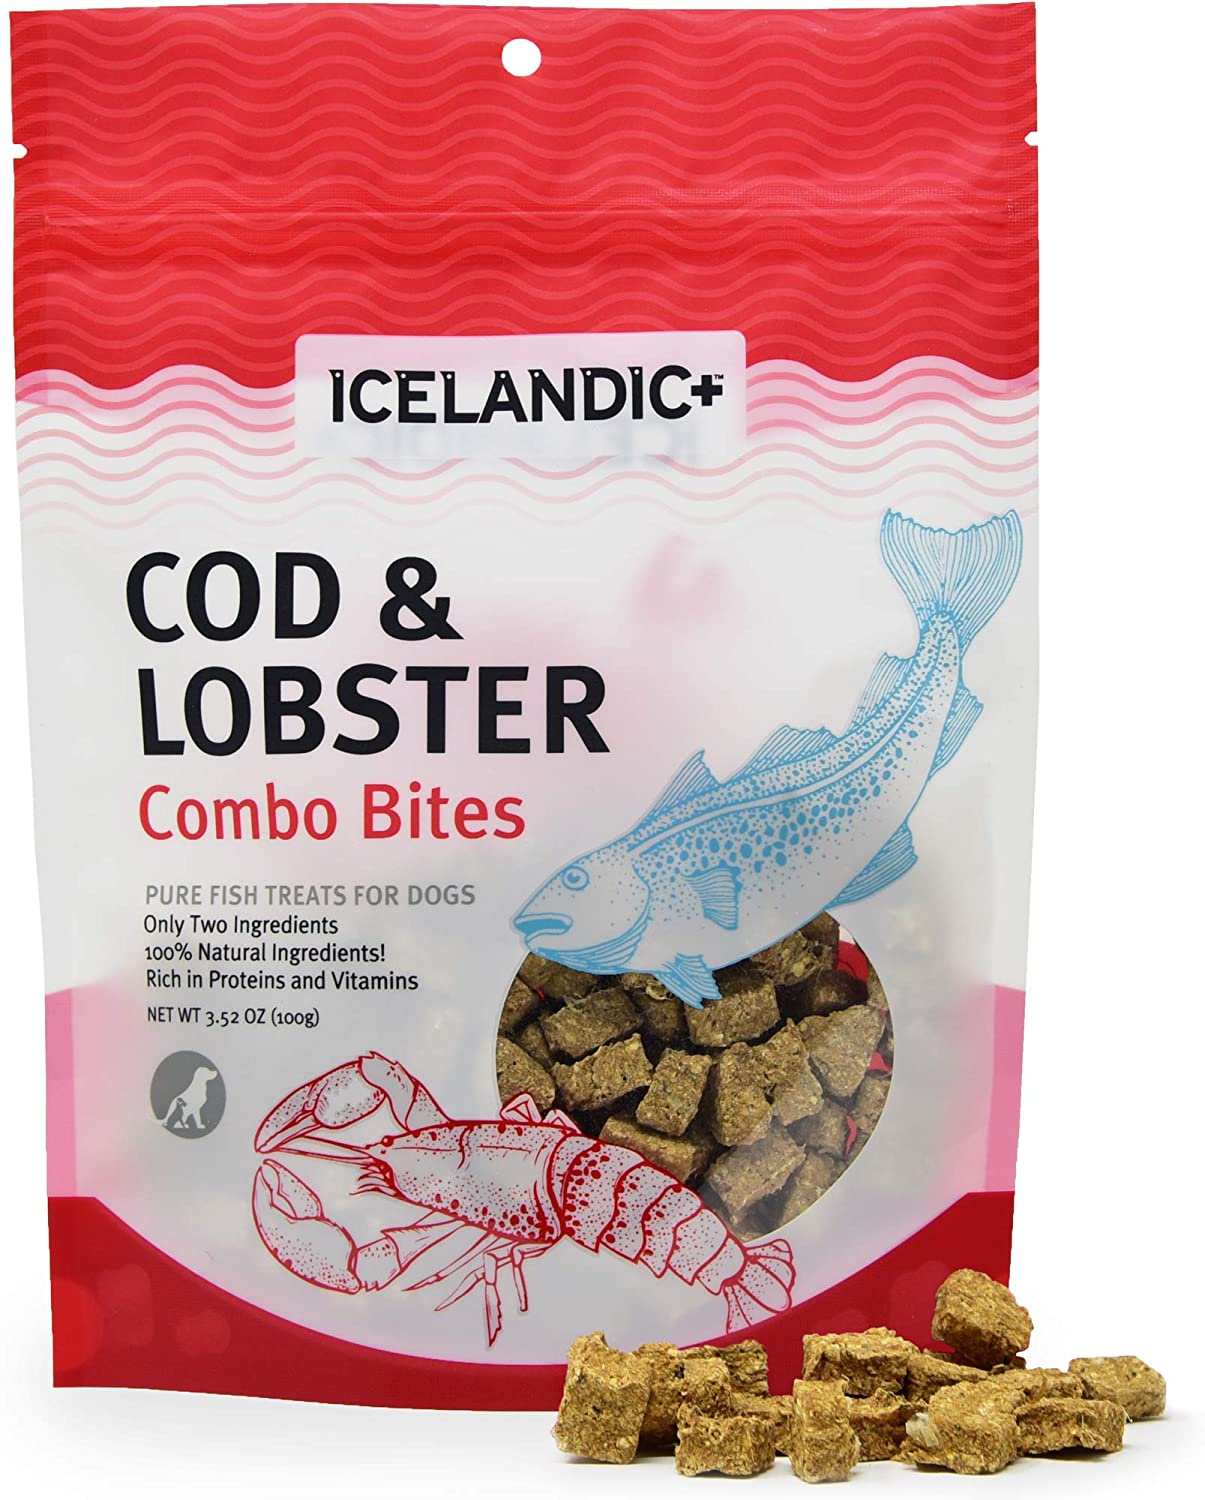 Icelandic+ All-Natural Dog Chew Treats Combo Bites Cod and Lobster